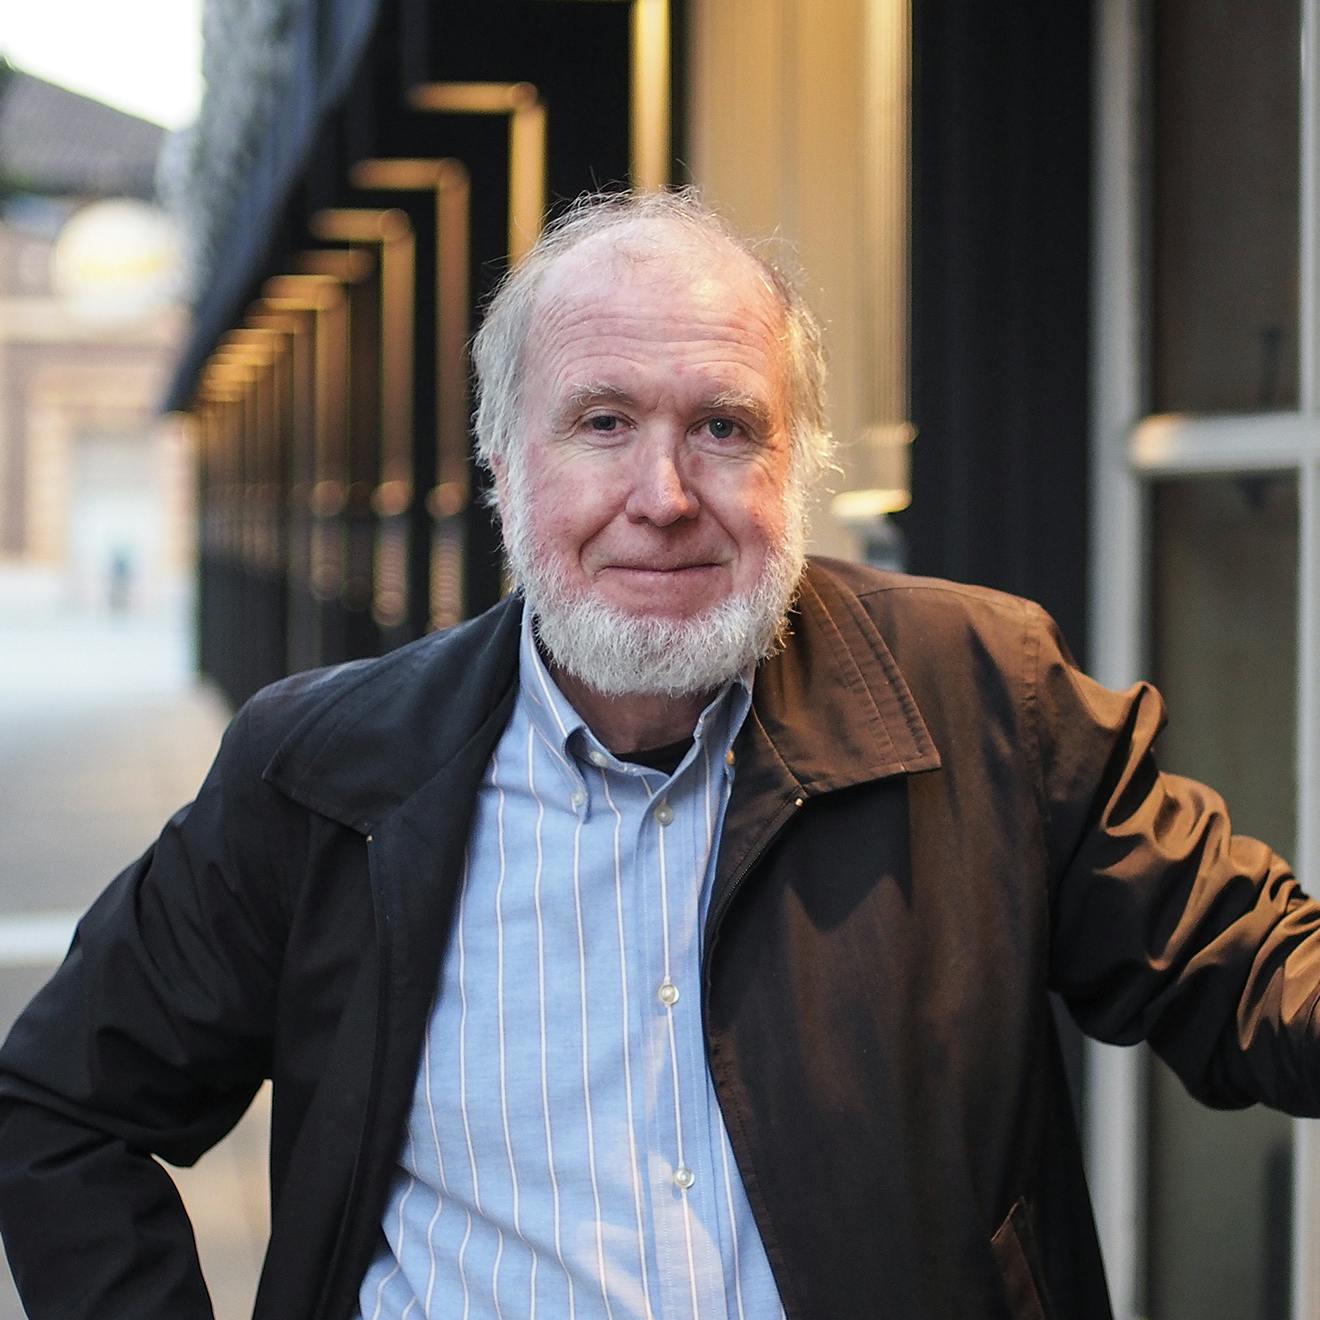 All-Time Top 10 Guests – #10 Kevin Kelly (On Technology's Origins, What Technology Wants, and Advising Steven Speilberg on Minority Report) Image